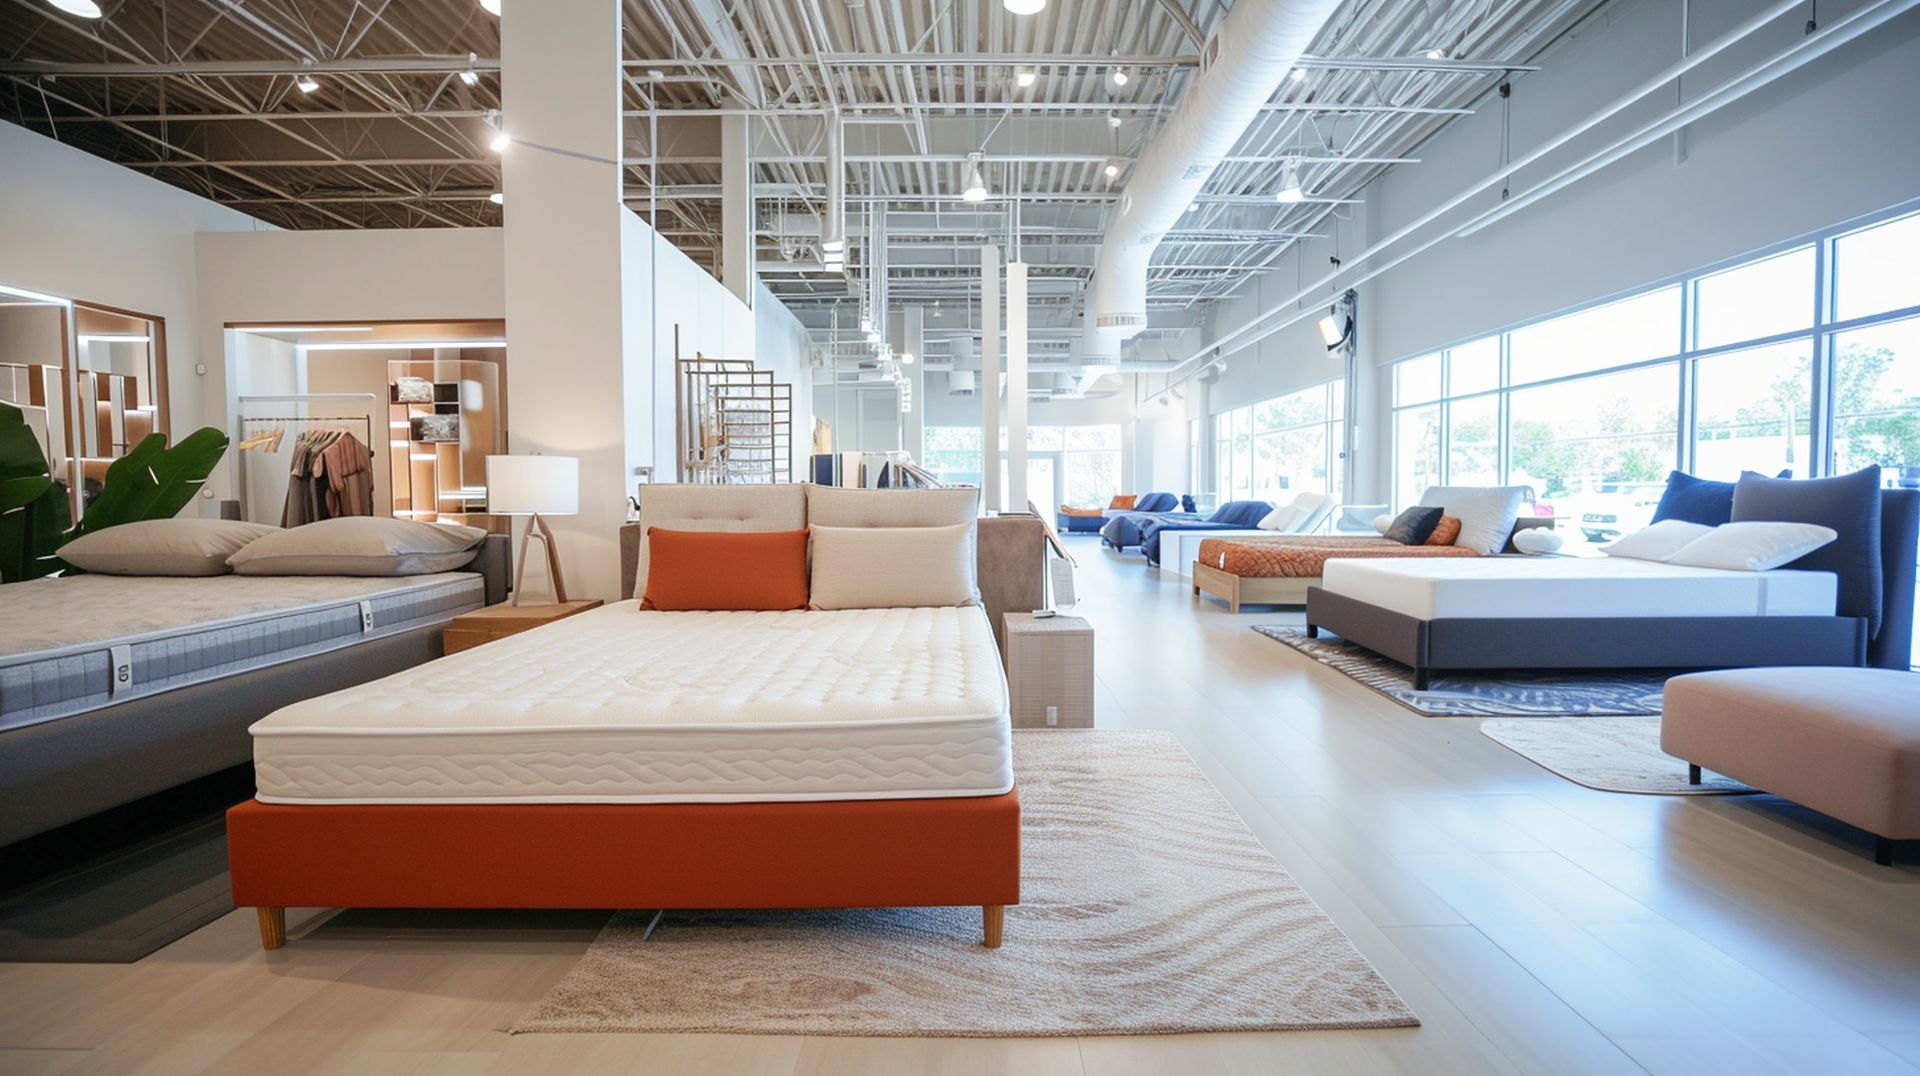 Types of mattresses at mattress dealers in Salem, OR